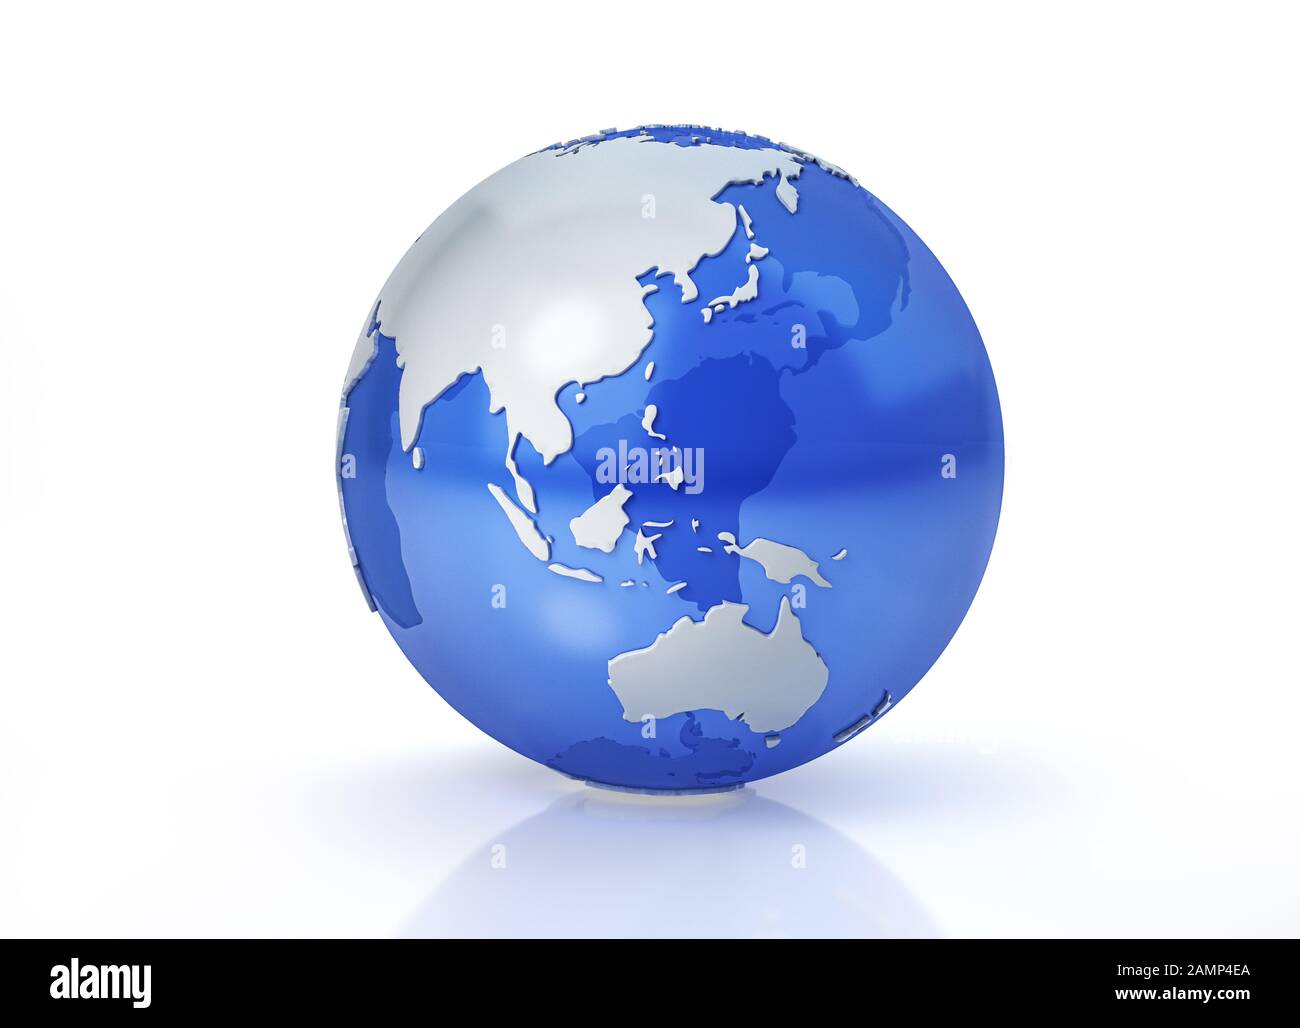 Earth globe stylized. Grey continents in relief. With transparent seas to  reveal continents on the other side. On white background. Oceania view  Stock Photo - Alamy